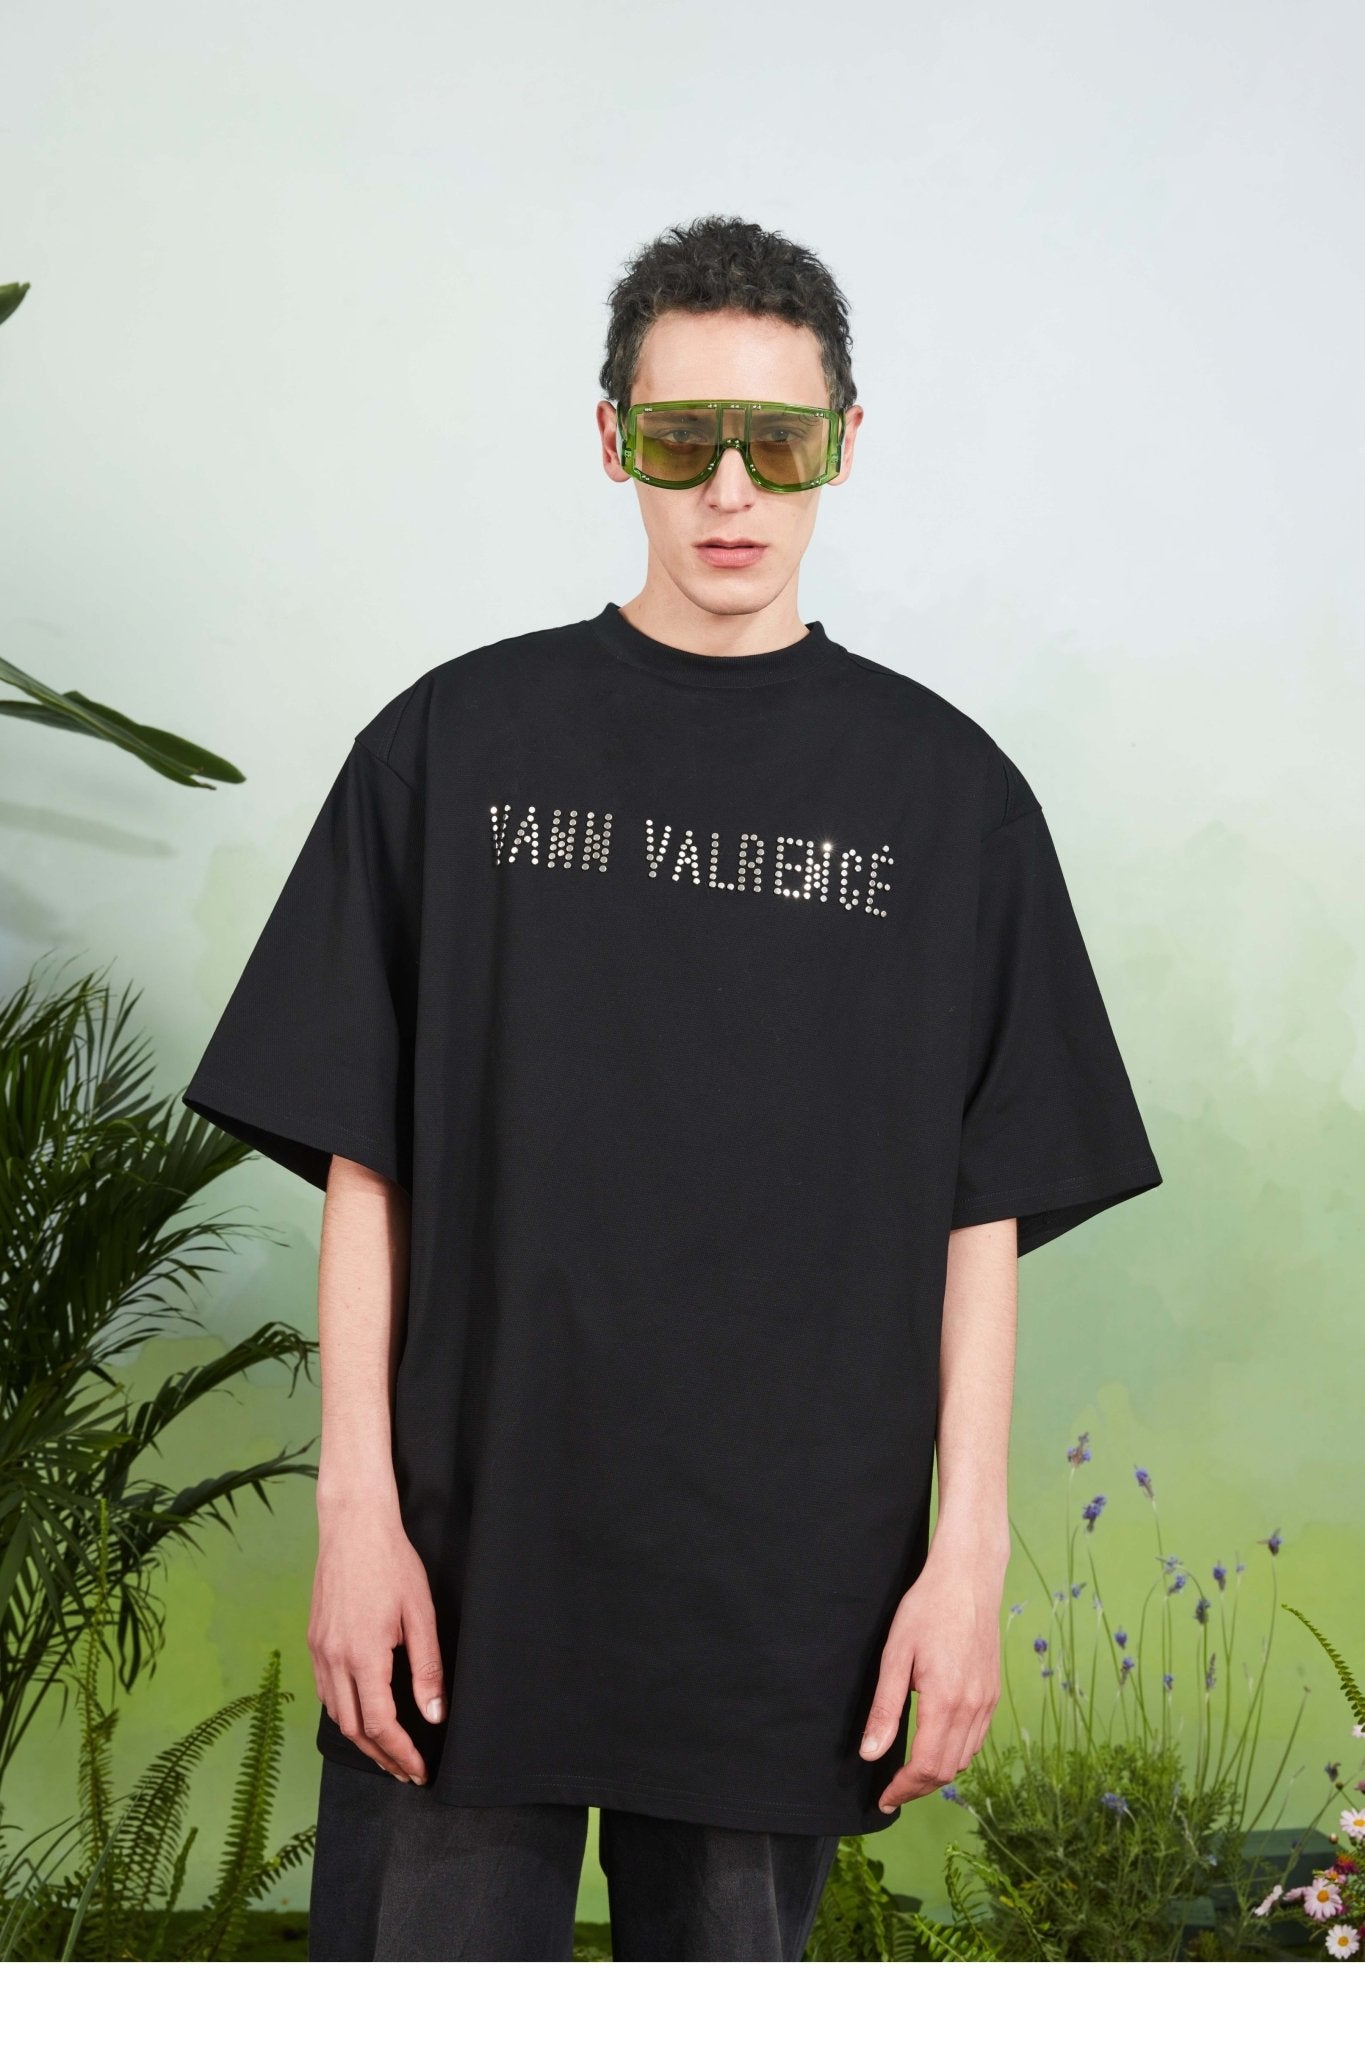 VANN VALRENCÉ Bump Nails To Decorate T-Shirt | MADA IN CHINA